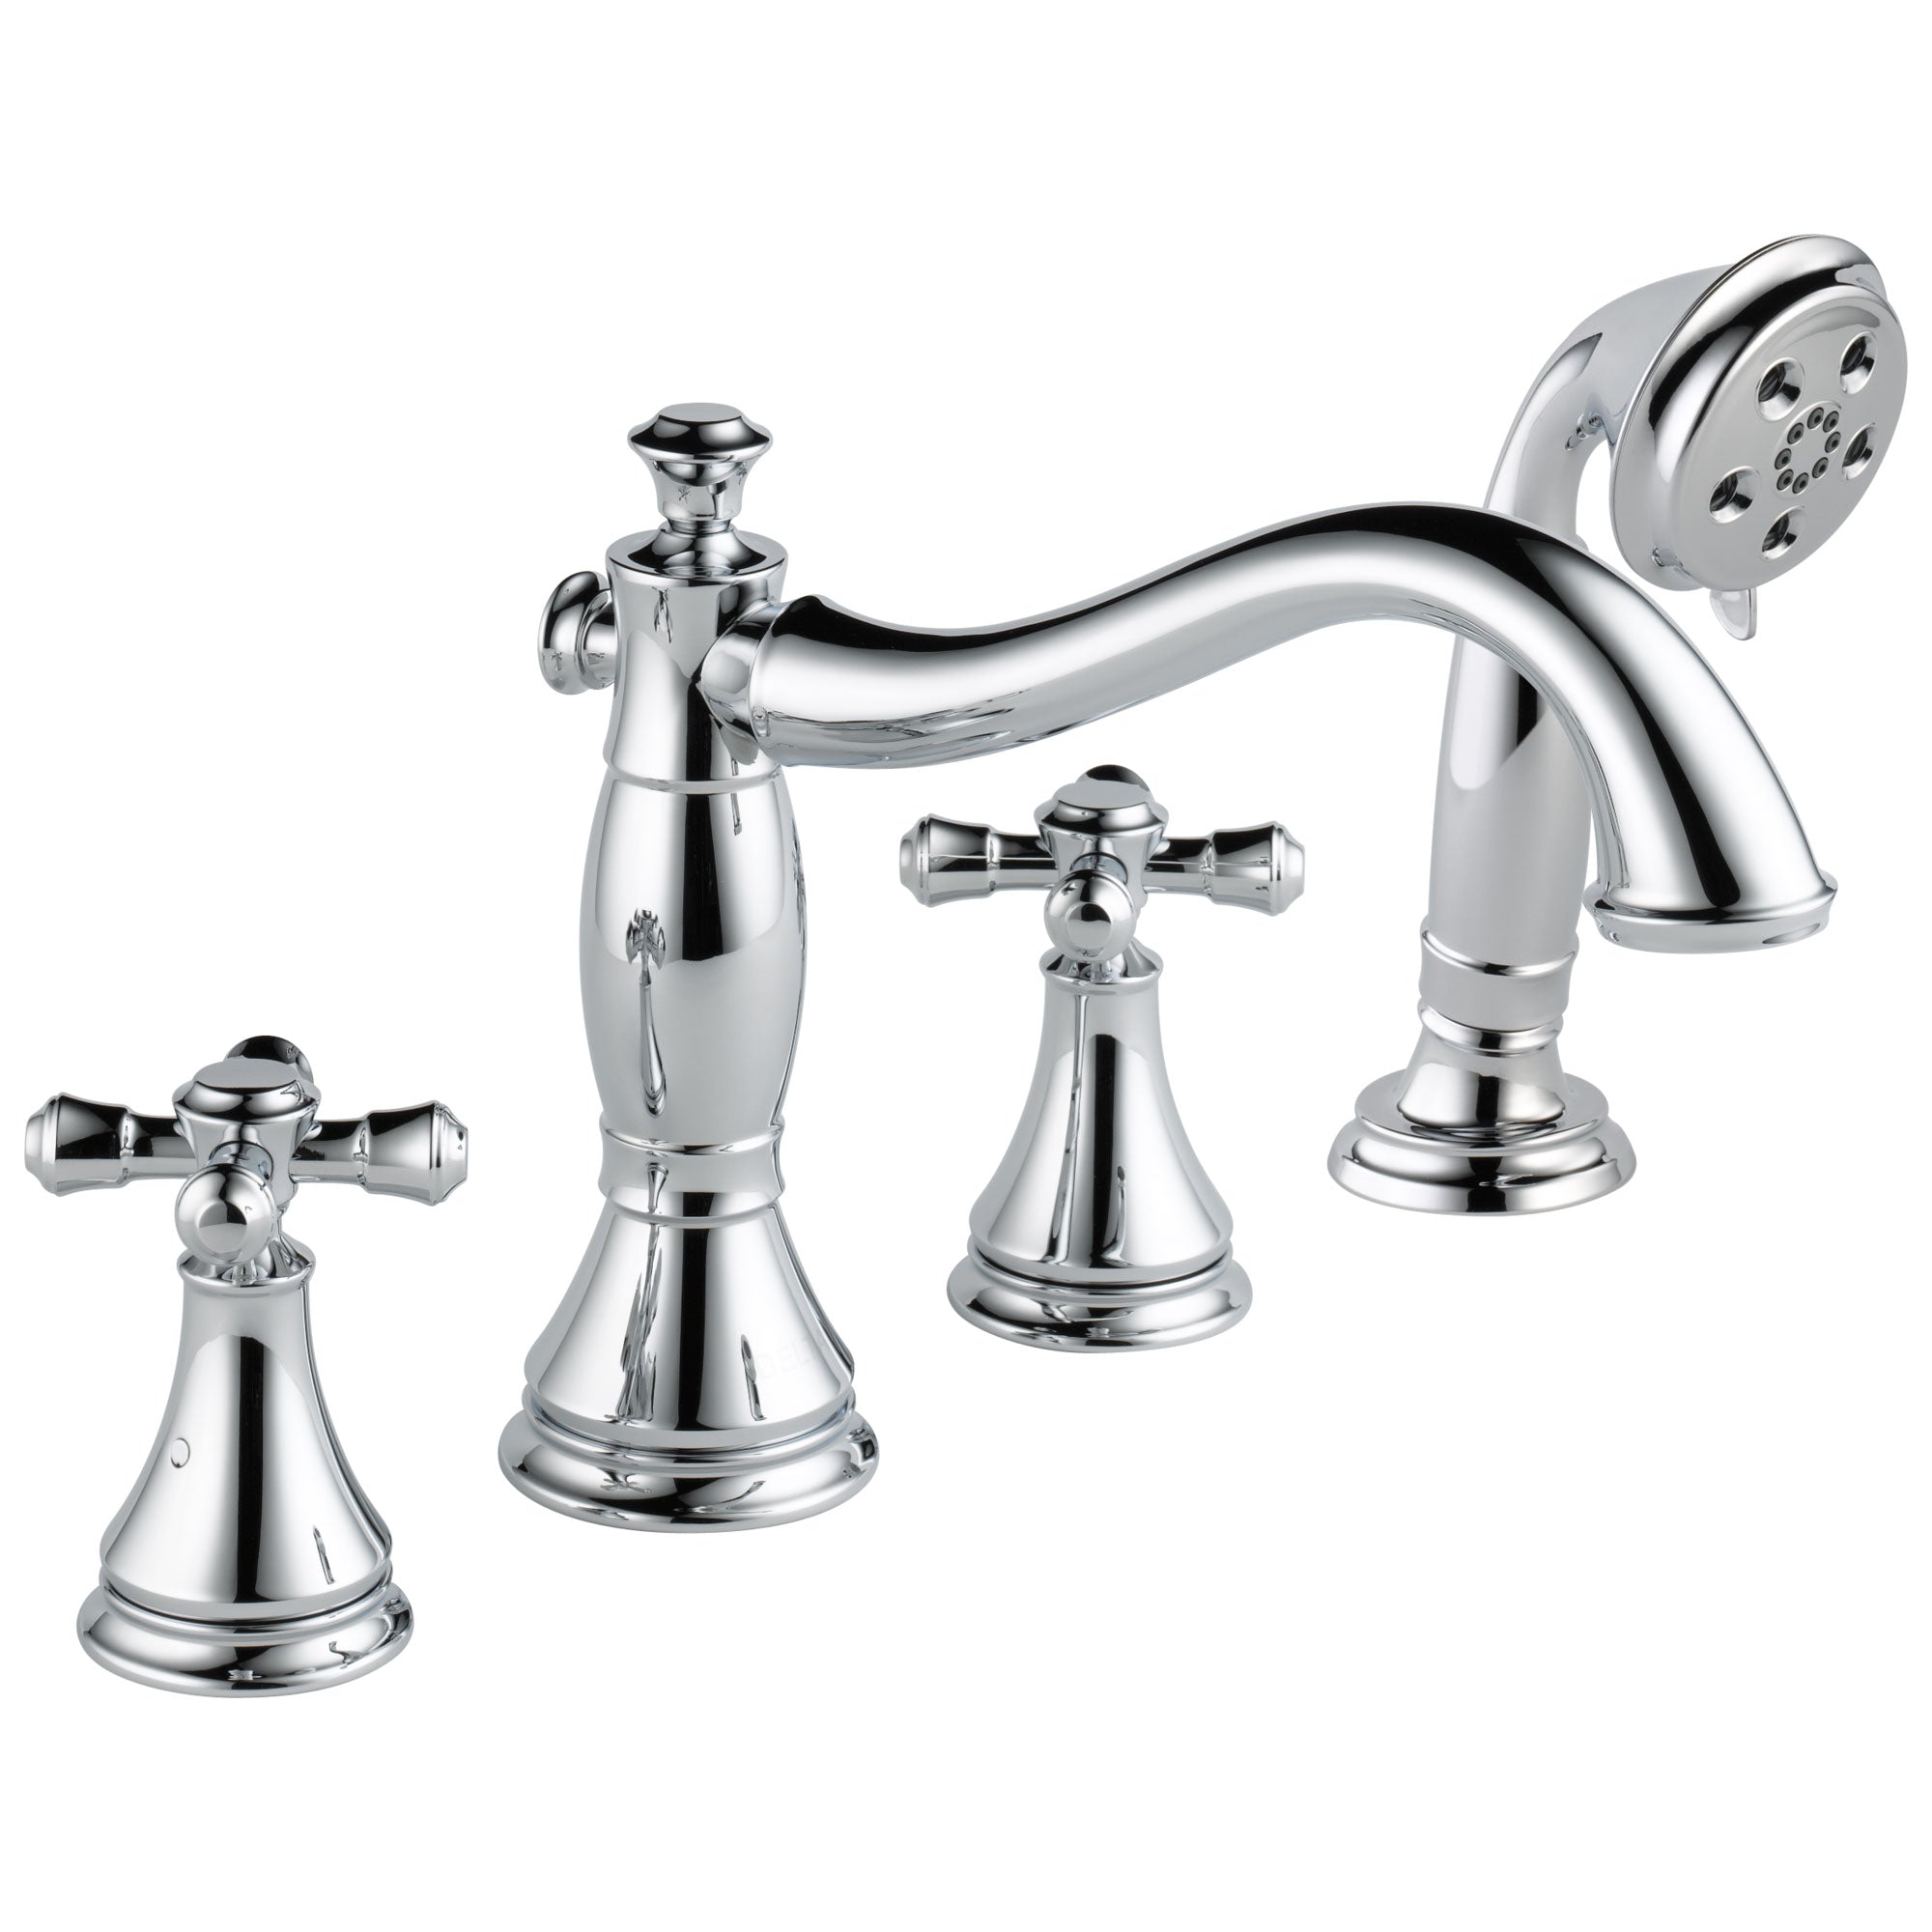 Delta Cassidy Collection Chrome Finish Roman Tub Filler Faucet with Hand Shower INCLUDES (2) Cross Handles and Rough-in Valve D1400V